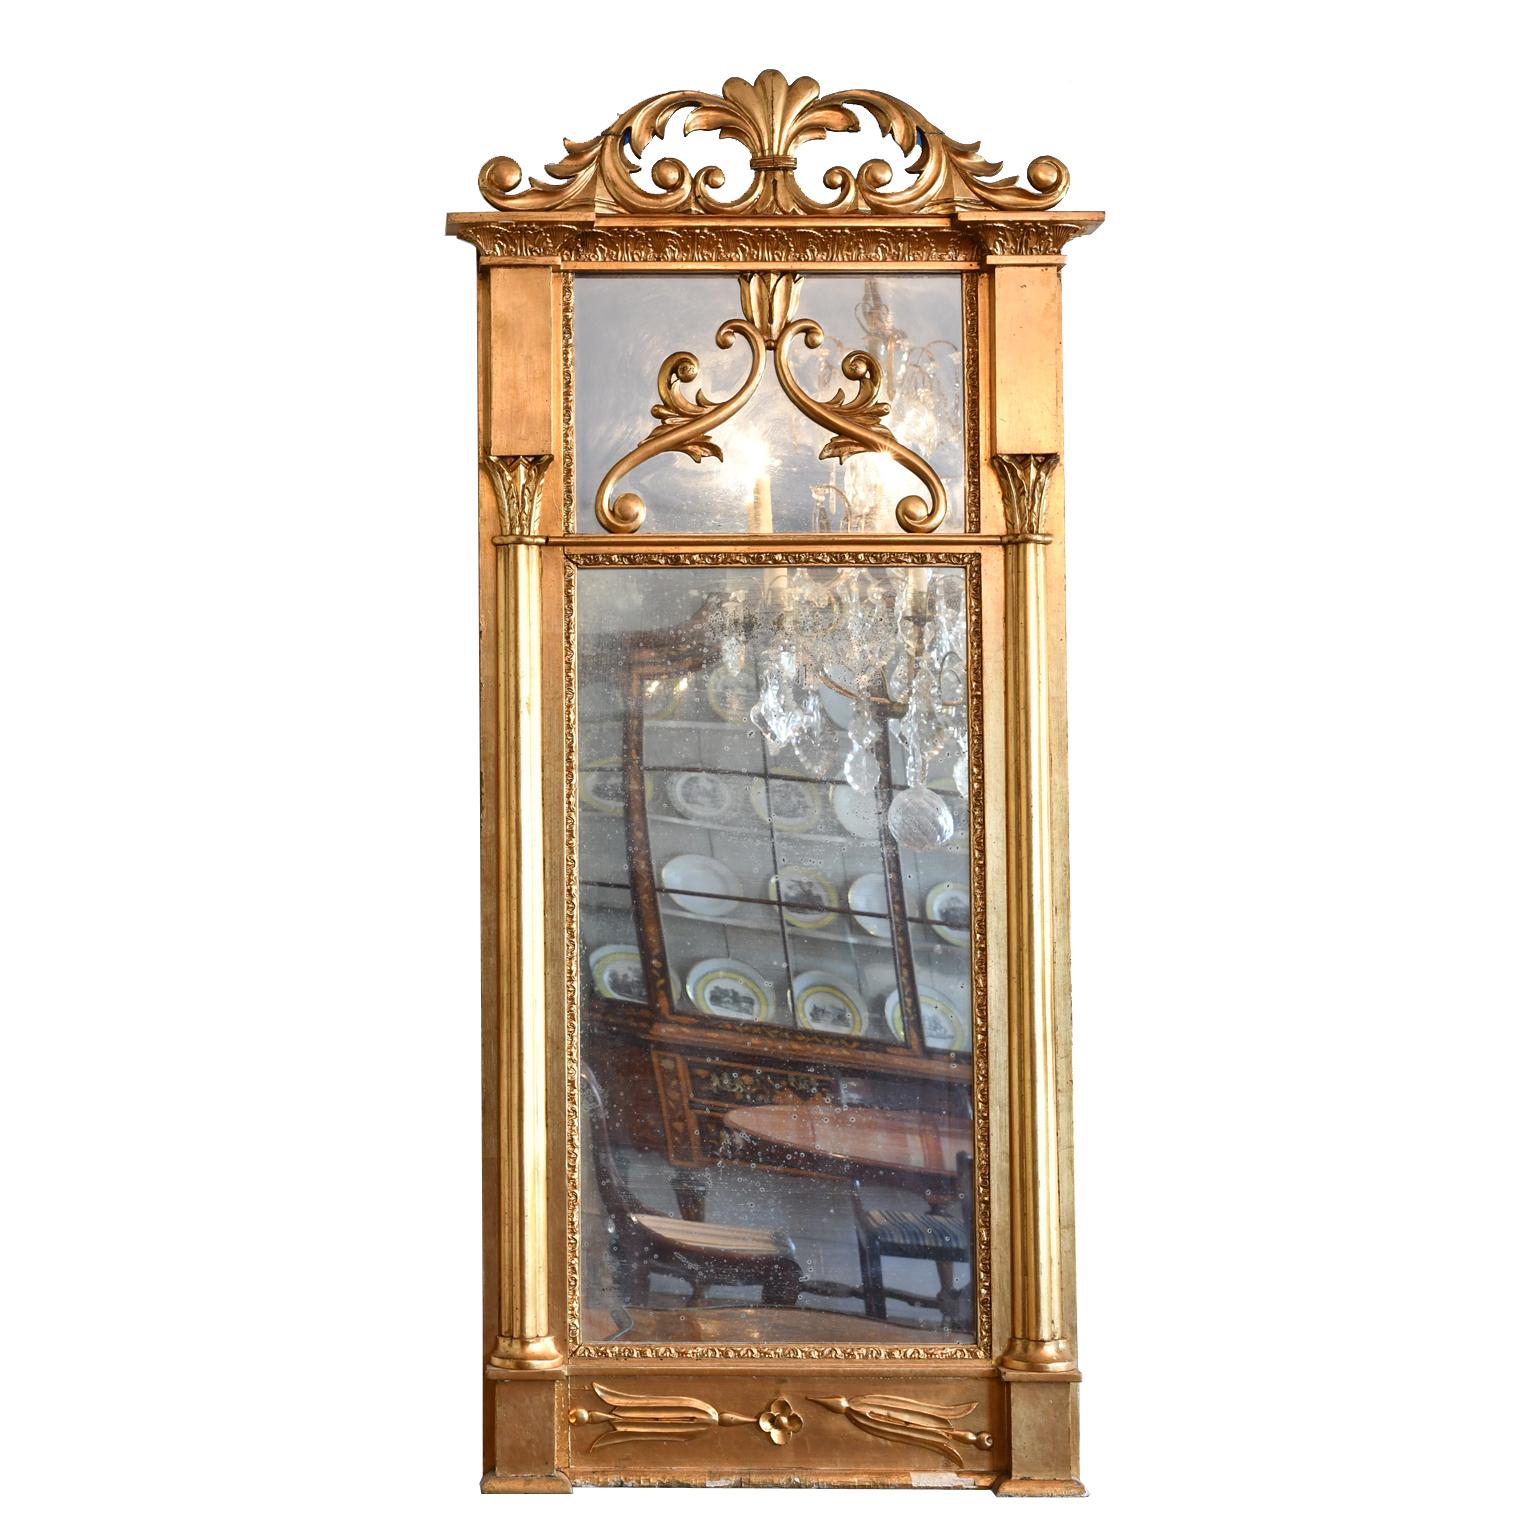 A lovely Karl Johan mirror in giltwood with carved and scrolling acanthus foliage above cornice. Main rectangular mirror plate is flanked by pilasters with acanthus-carved capitals, and surmounted by a smaller mirror plate that is decorated with 